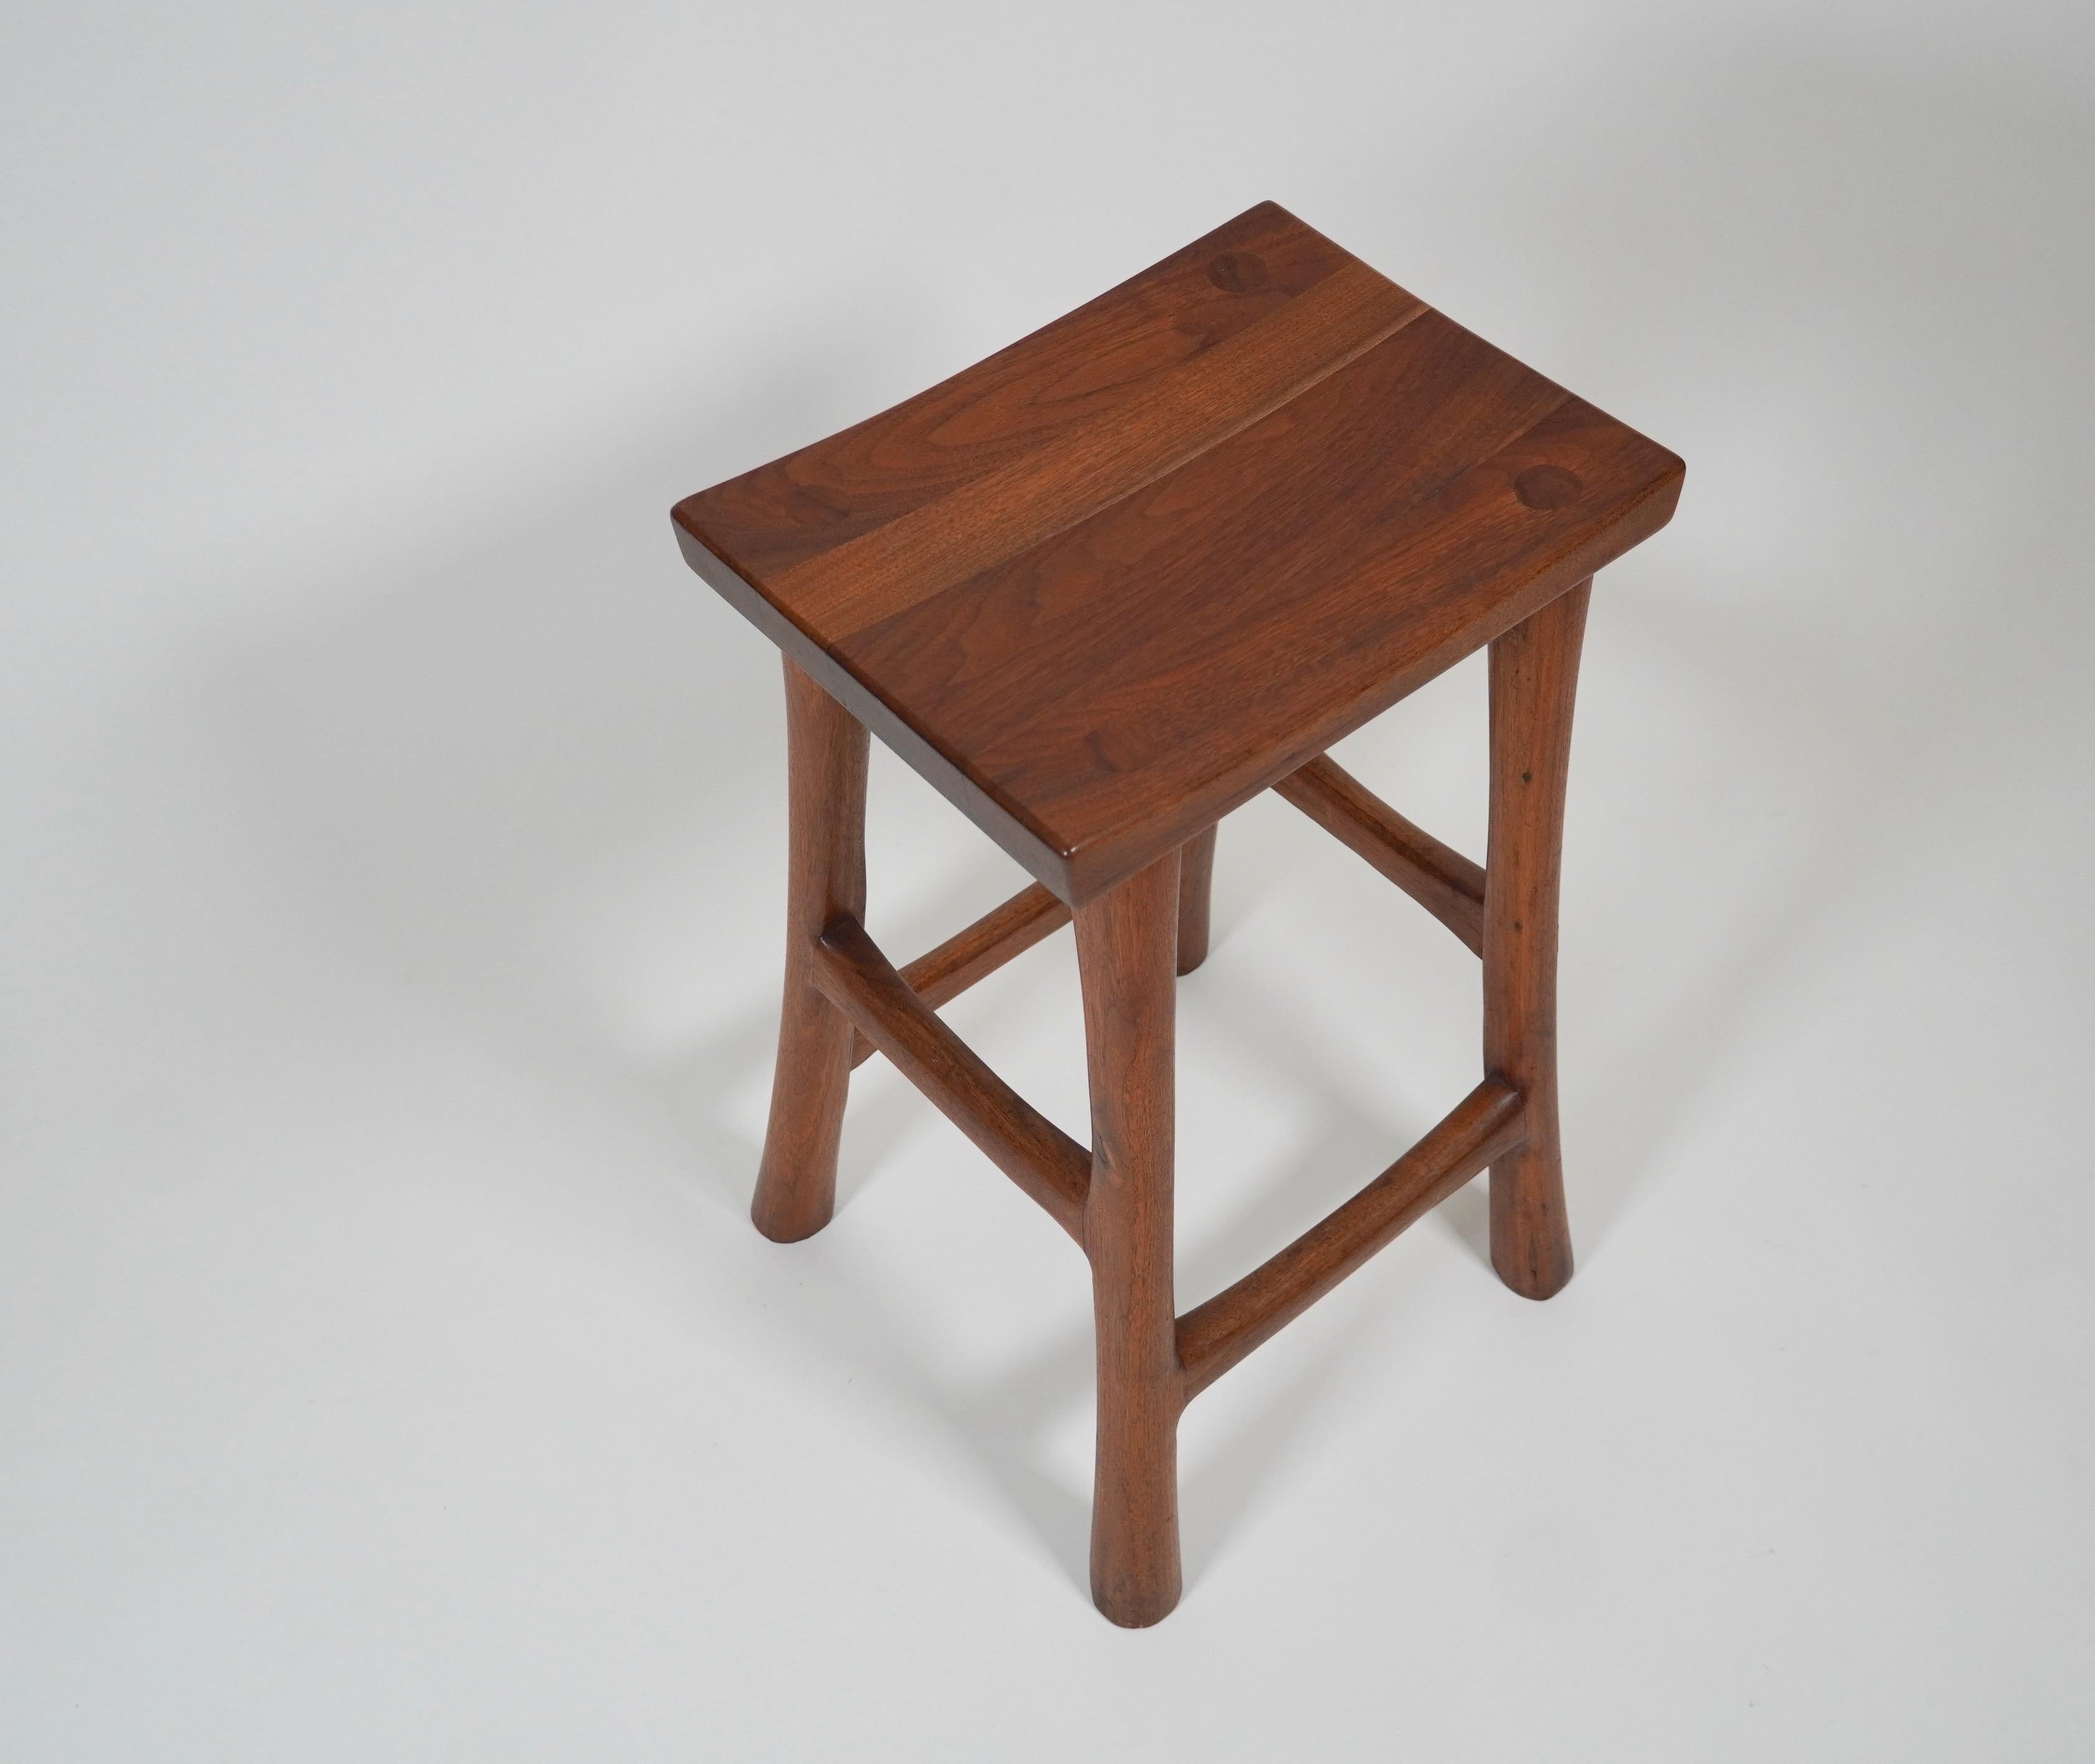 Organic Modern counter height stool by American studio woodworker Wade Andersen, crafted out of walnut with a slight angle pagoda top seat with gracefully tapered legs and cross supports with the leg joints into the seat.